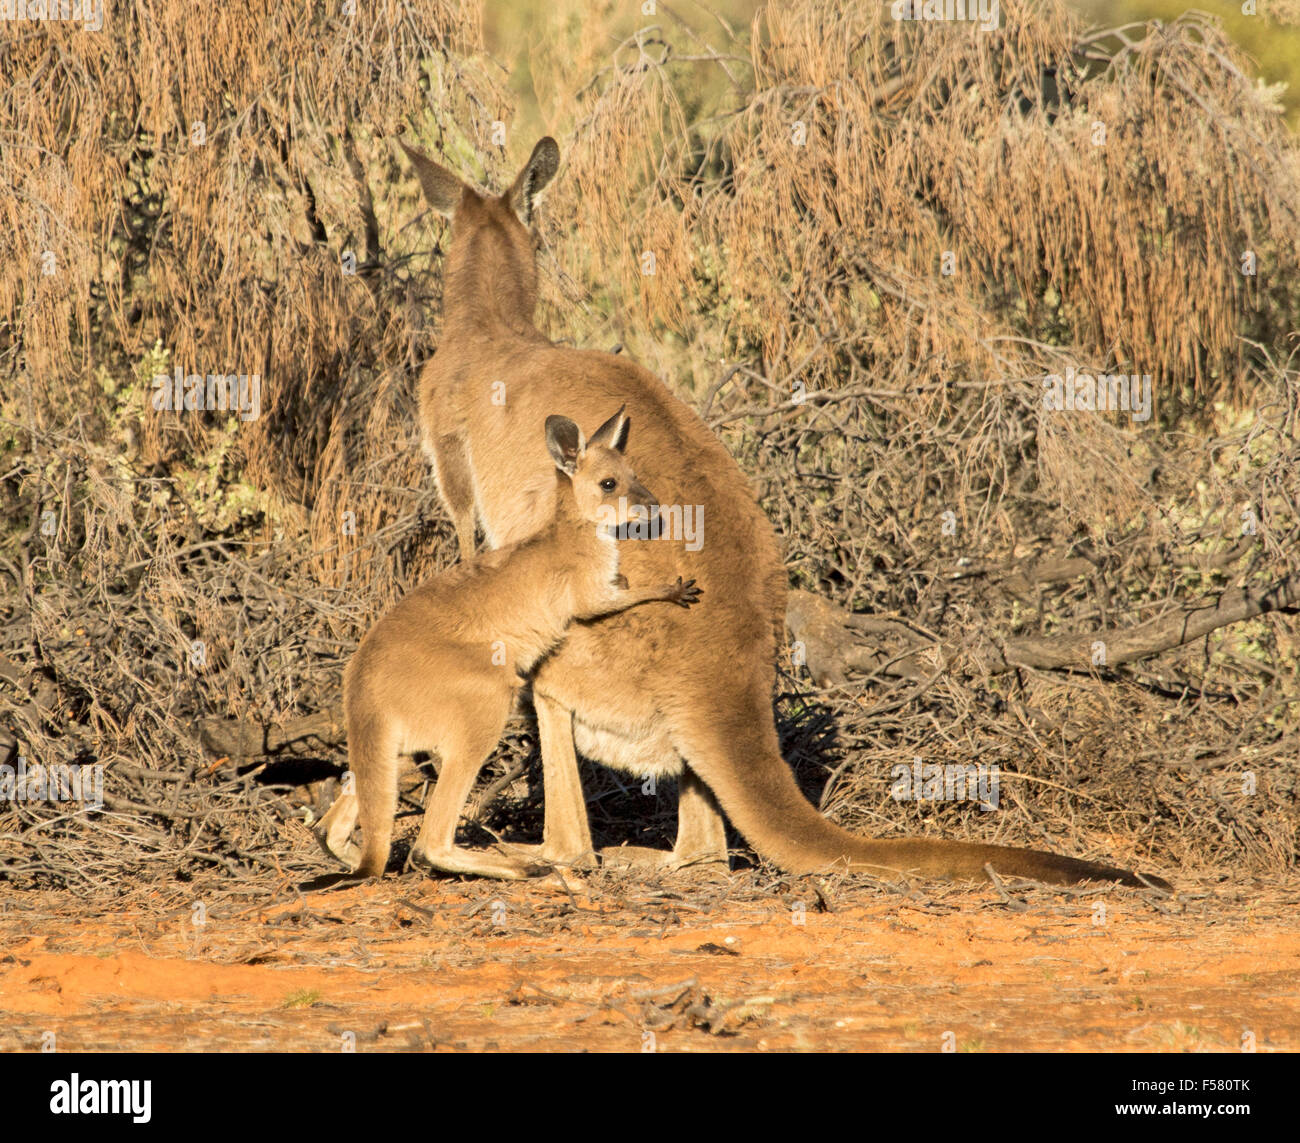 Young western grey kangaroo, Macropus fuliginosus, in the wild, leaning on its mother's back during play, in outback Australia Stock Photo